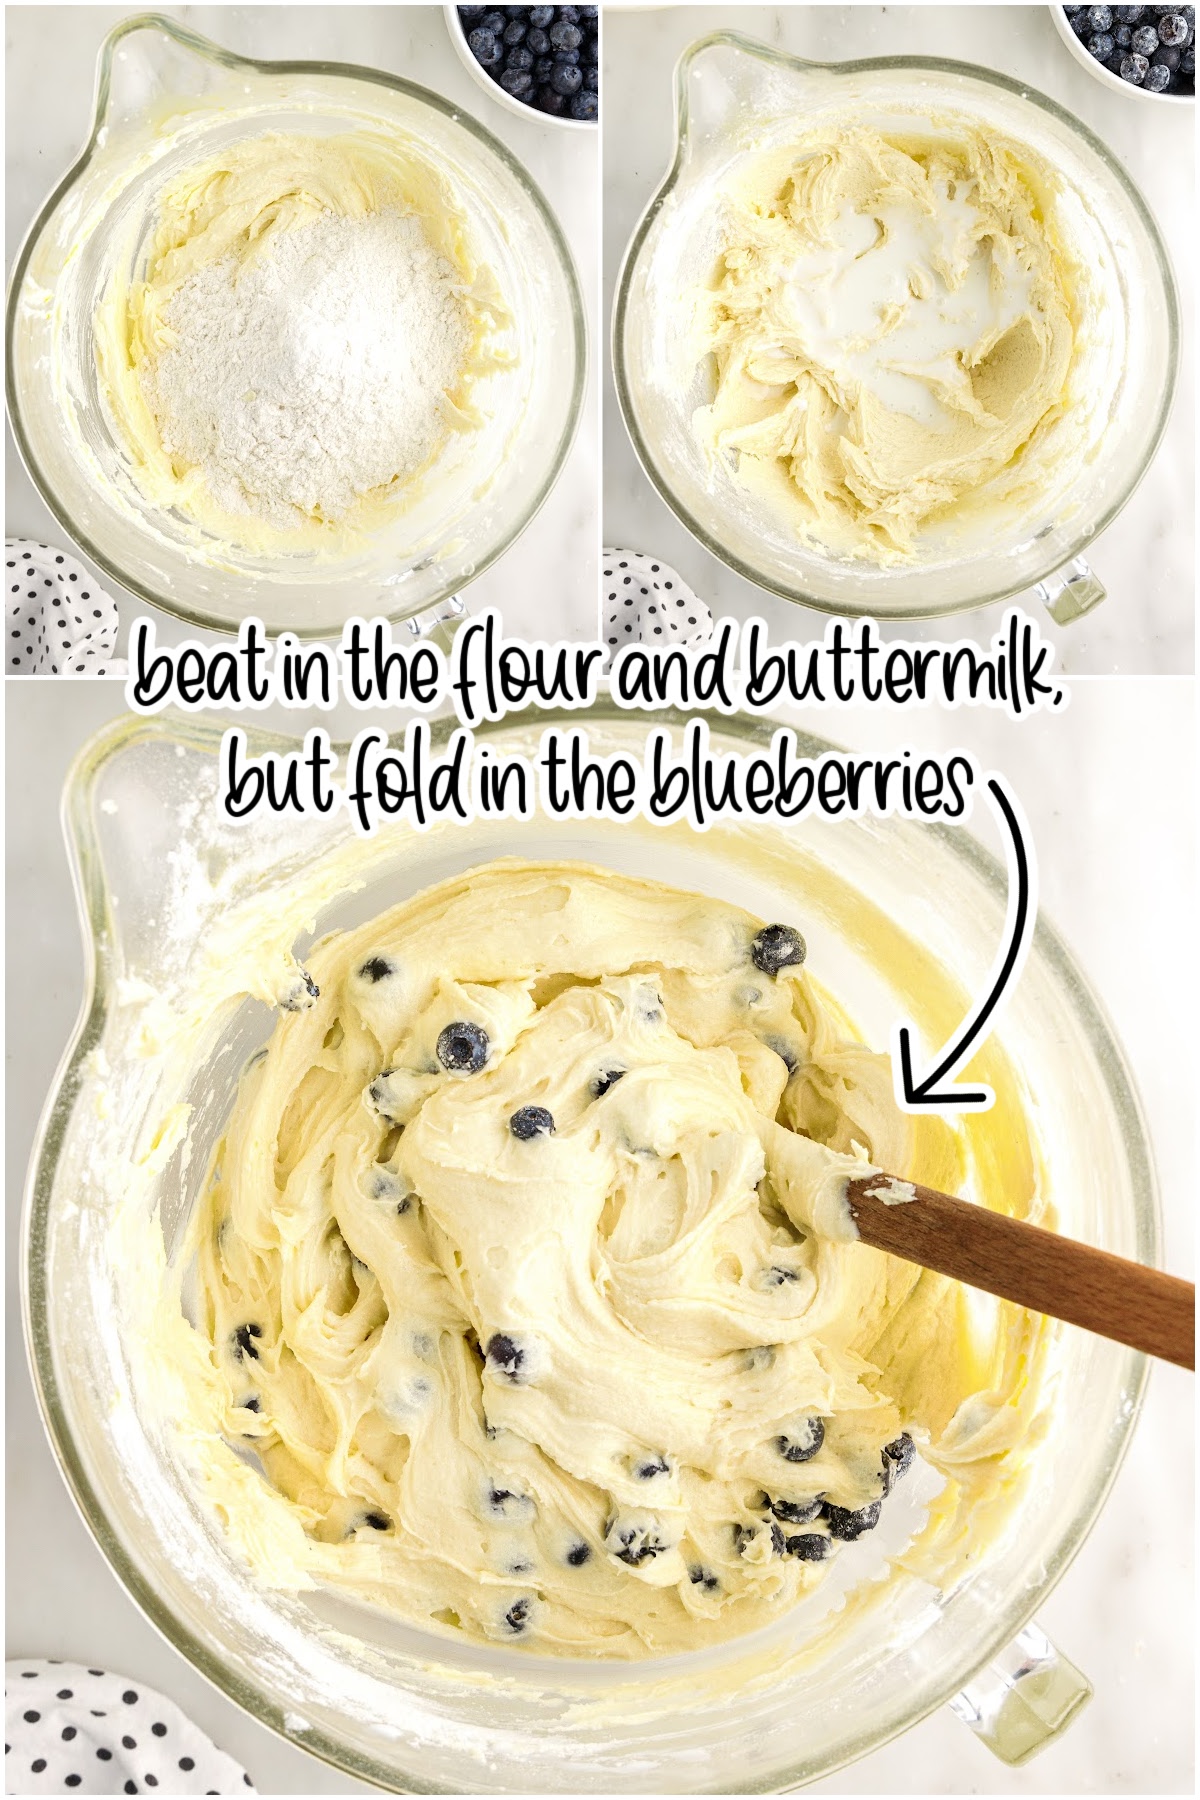 Three images of flour added to batter, buttermilk added to the mixture, and blueberries added to Blueberry Pound Cake batter with text overlay.